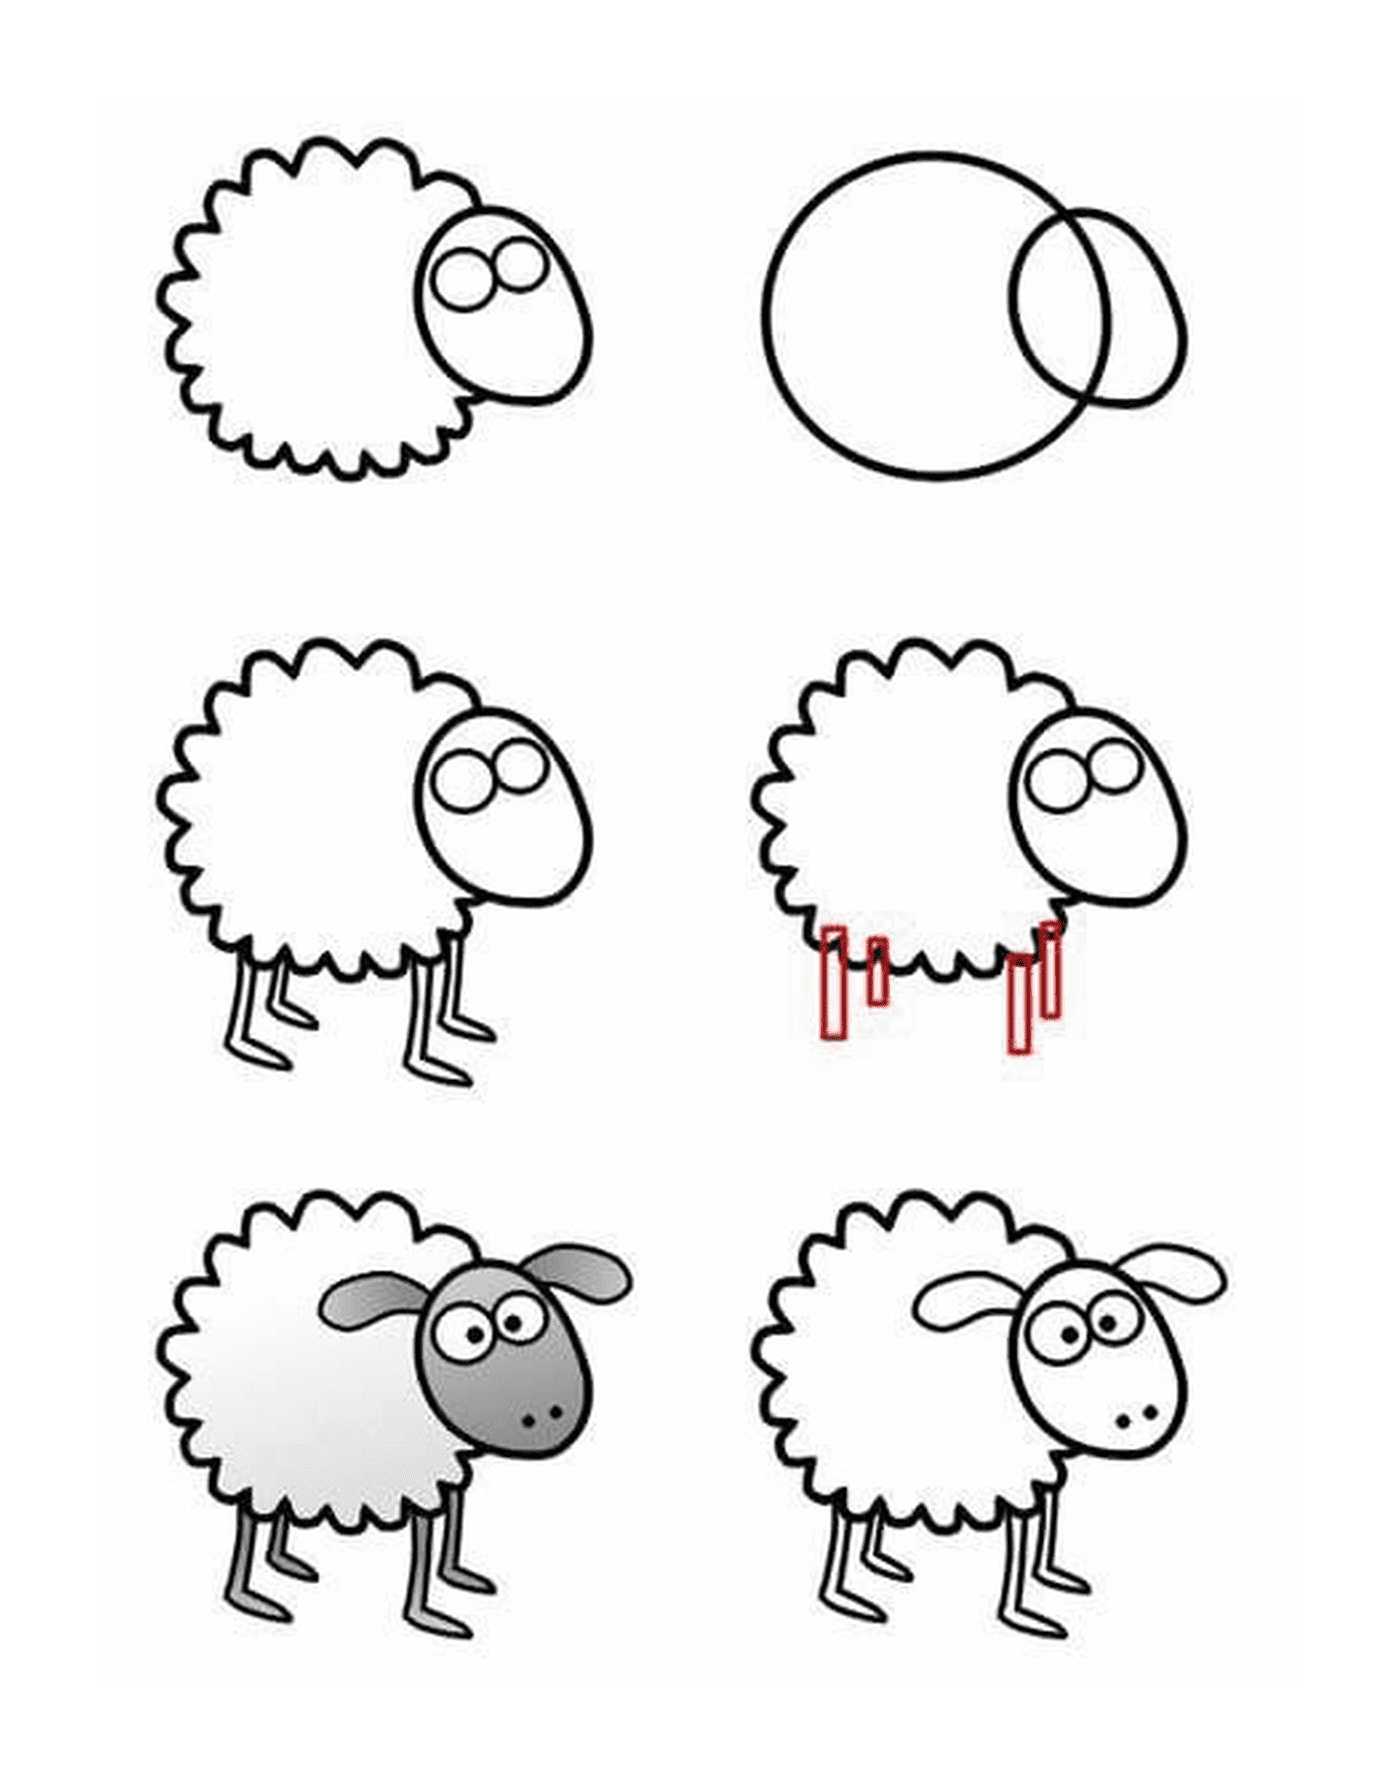  How to draw a sheep step by step 